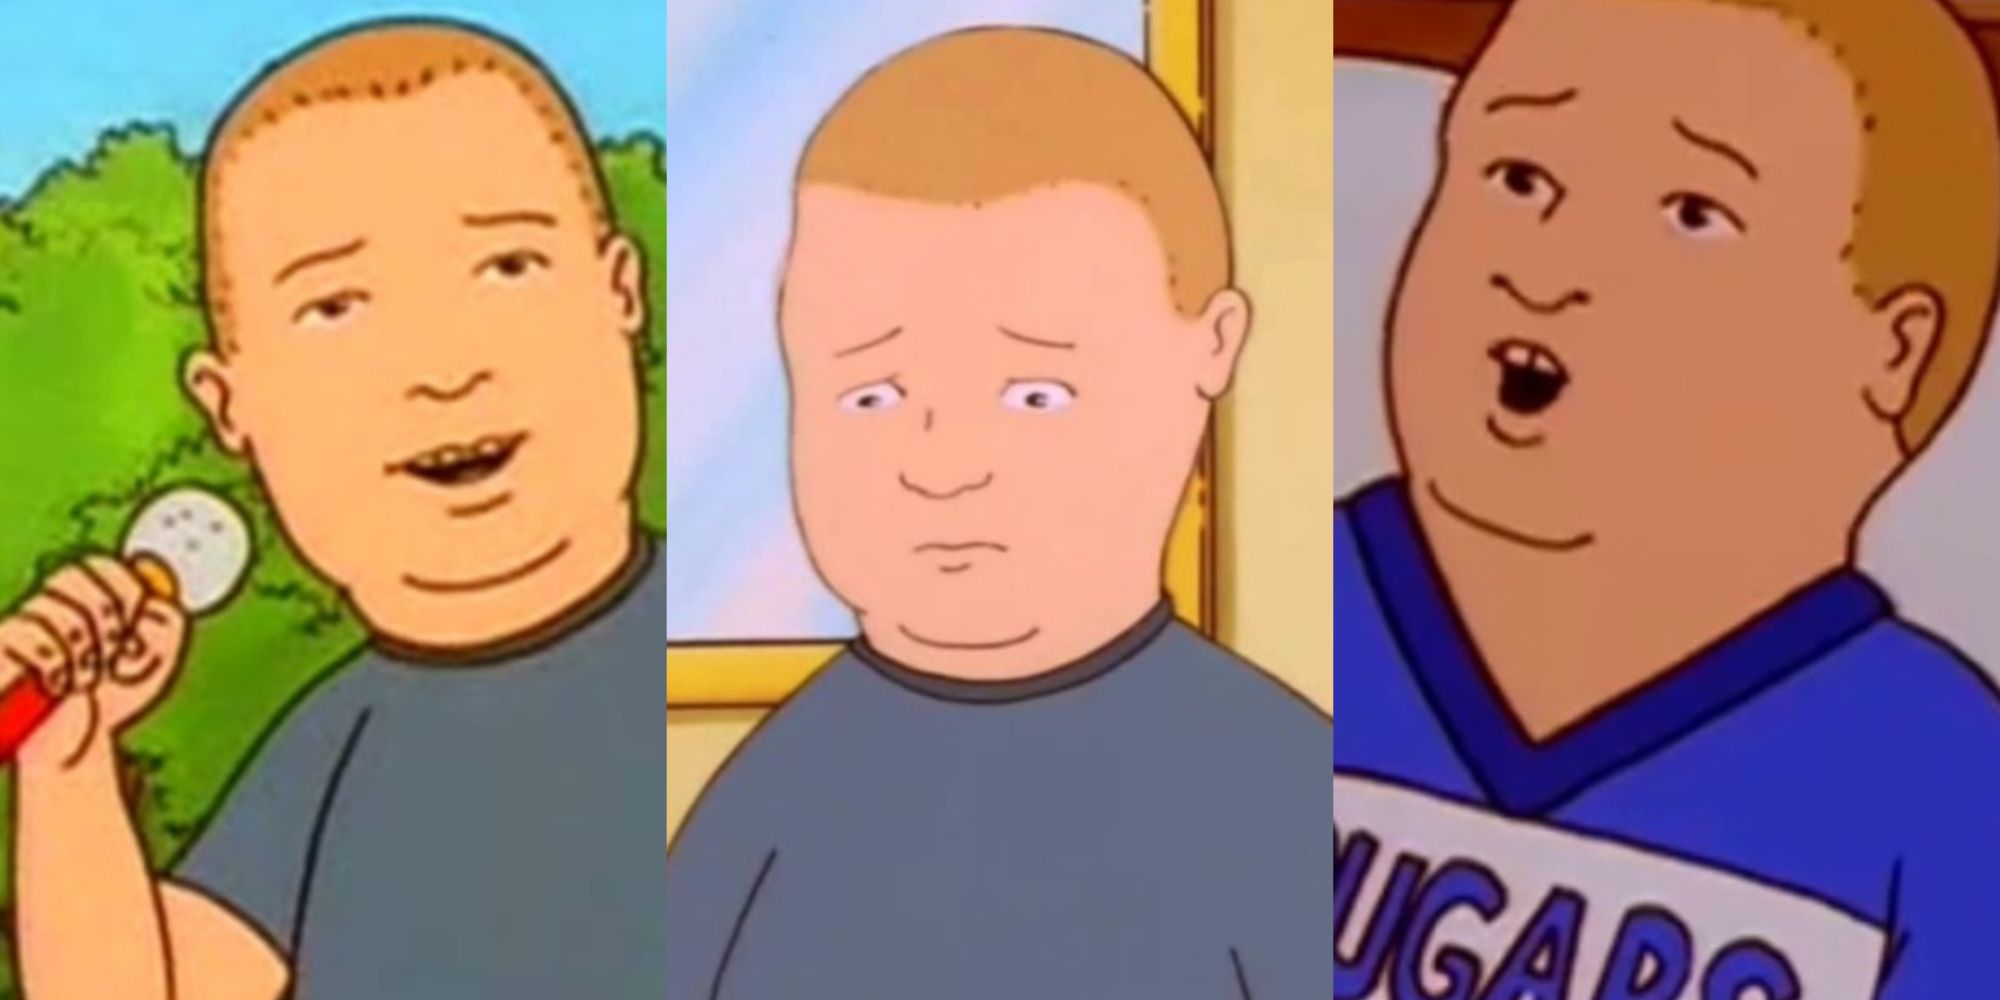 king of the hill funny quotes